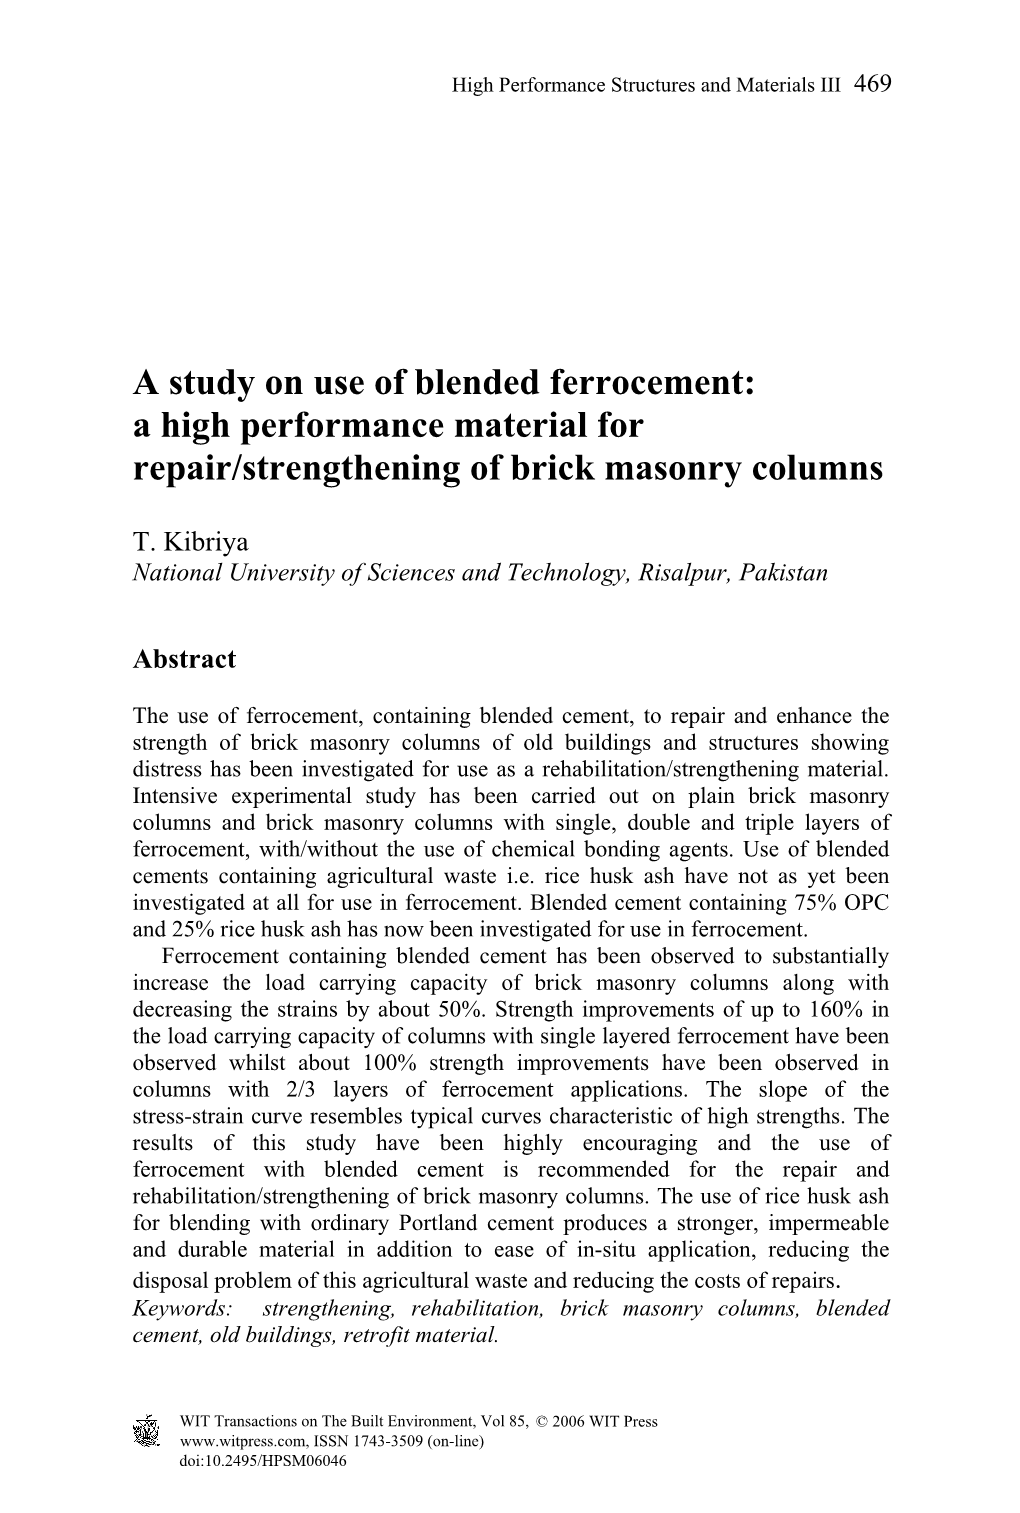 A Study on Use of Blended Ferrocement: a High Performance Material for Repair/Strengthening of Brick Masonry Columns